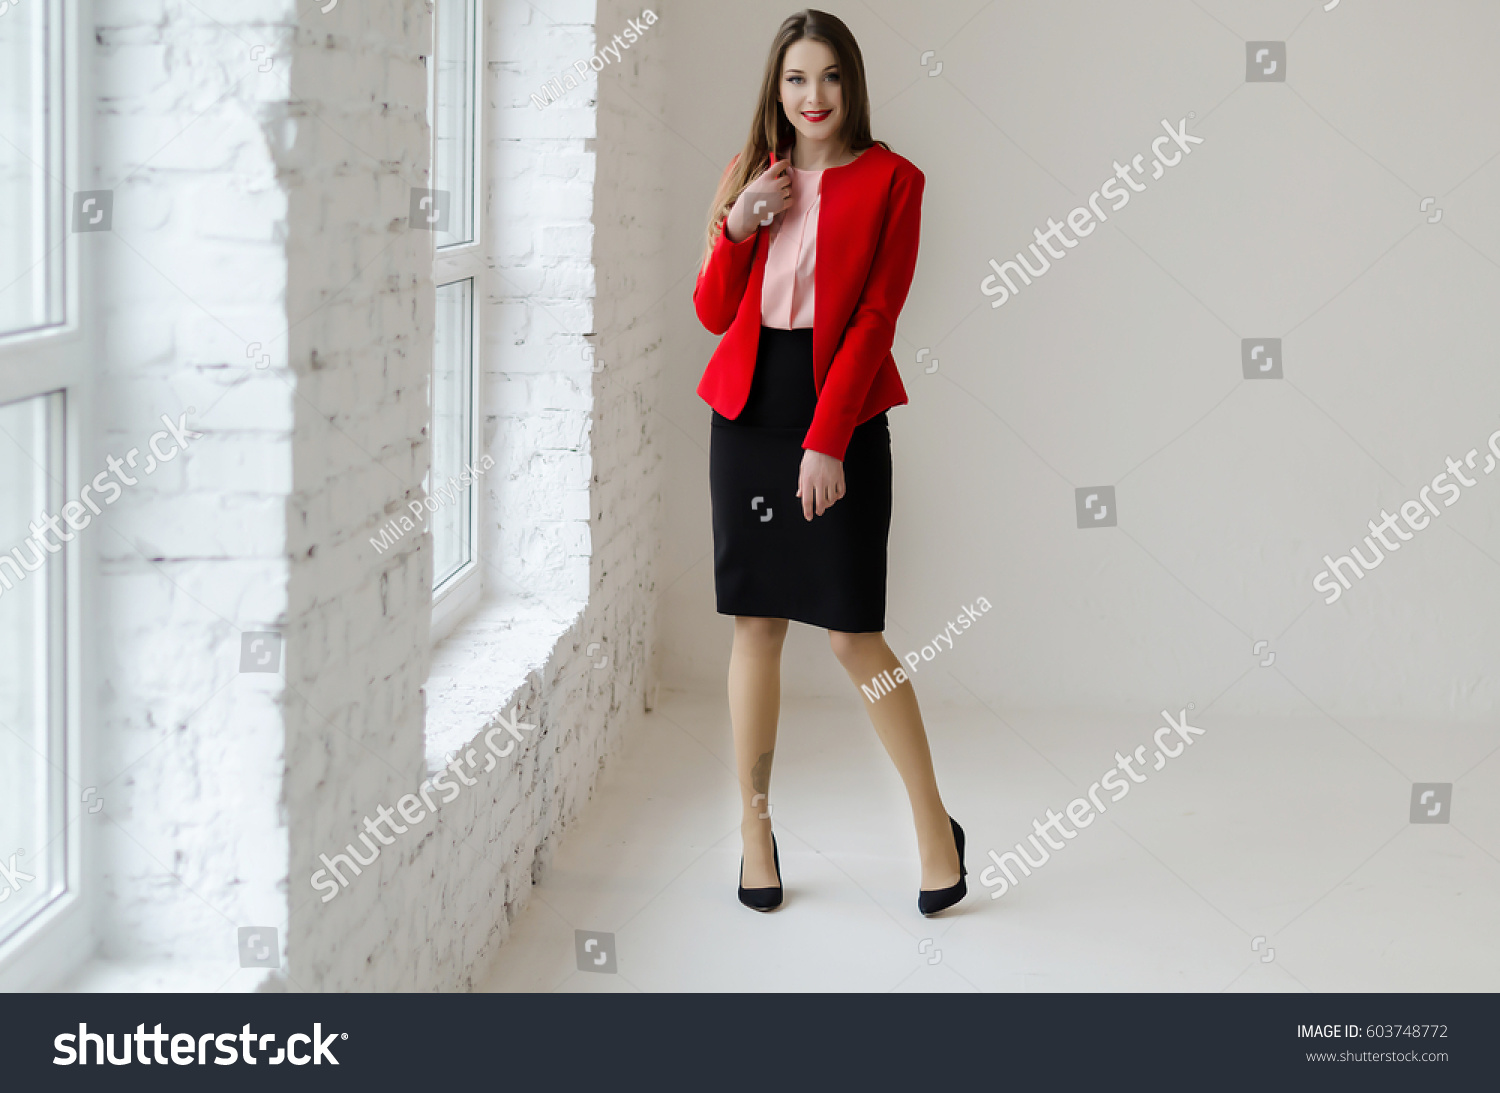 Young woman standing near the window, wearing shirt, jacket and skirt, have a long hair #603748772